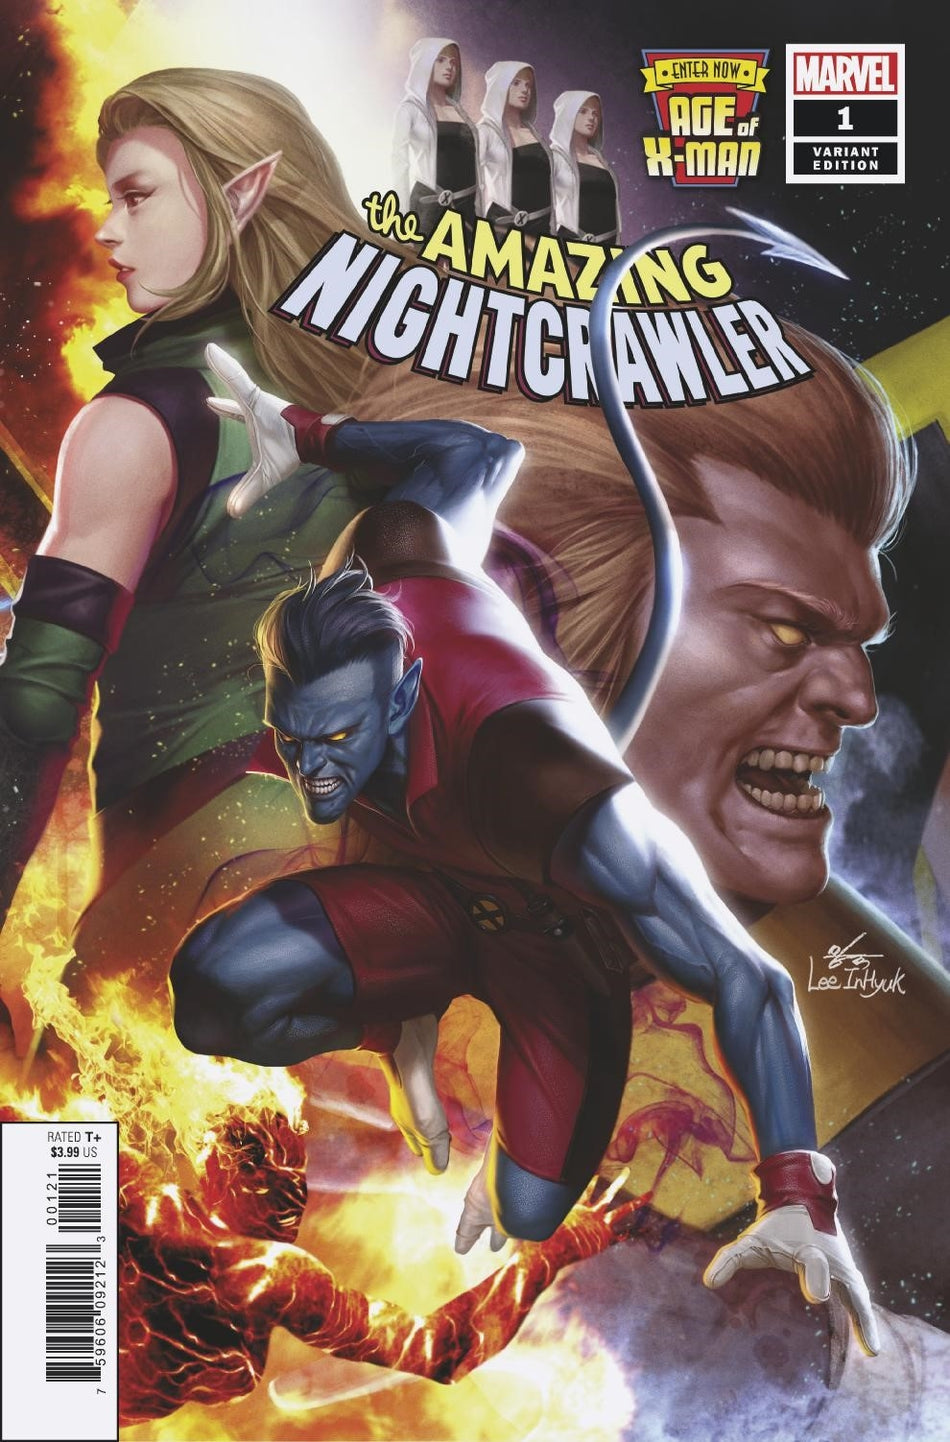 Photo of Age of X-Man Amazing Nightcrawler Issue 1 (Of 5) Inhyuk Lee Conne comic sold by Stronghold Collectibles